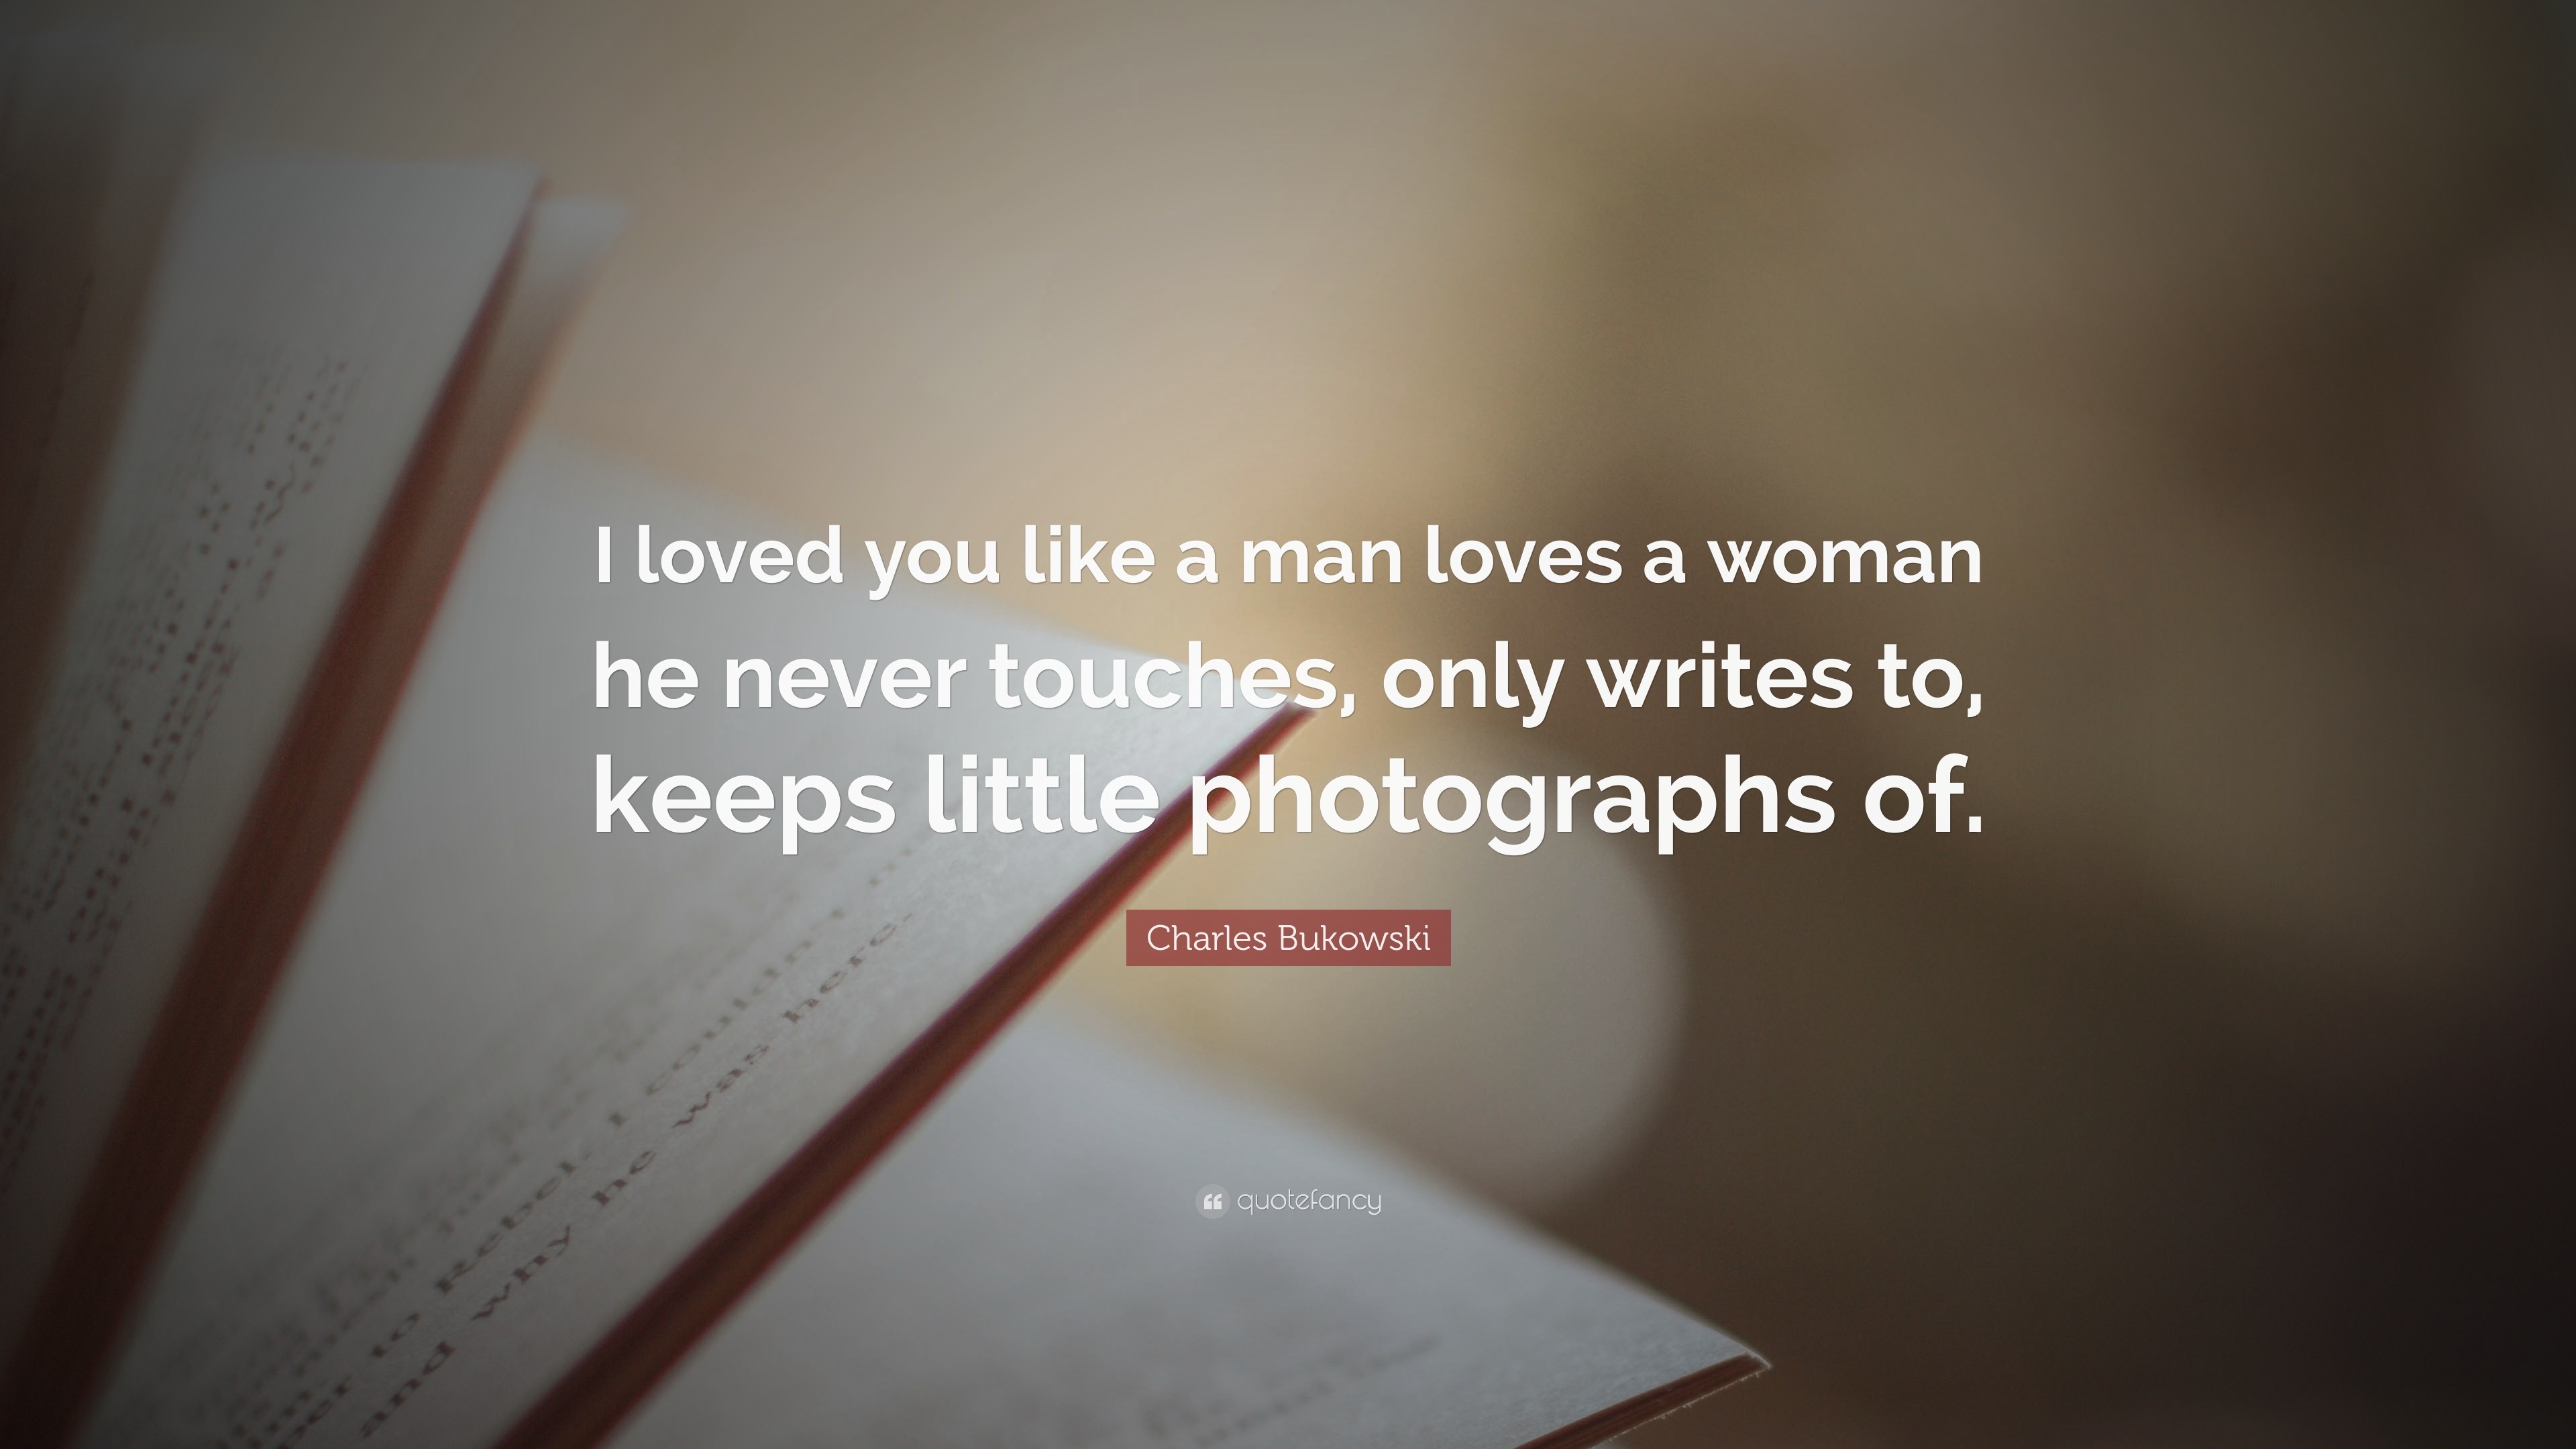 Charles Bukowski Quote “I loved you like a man loves a woman he never